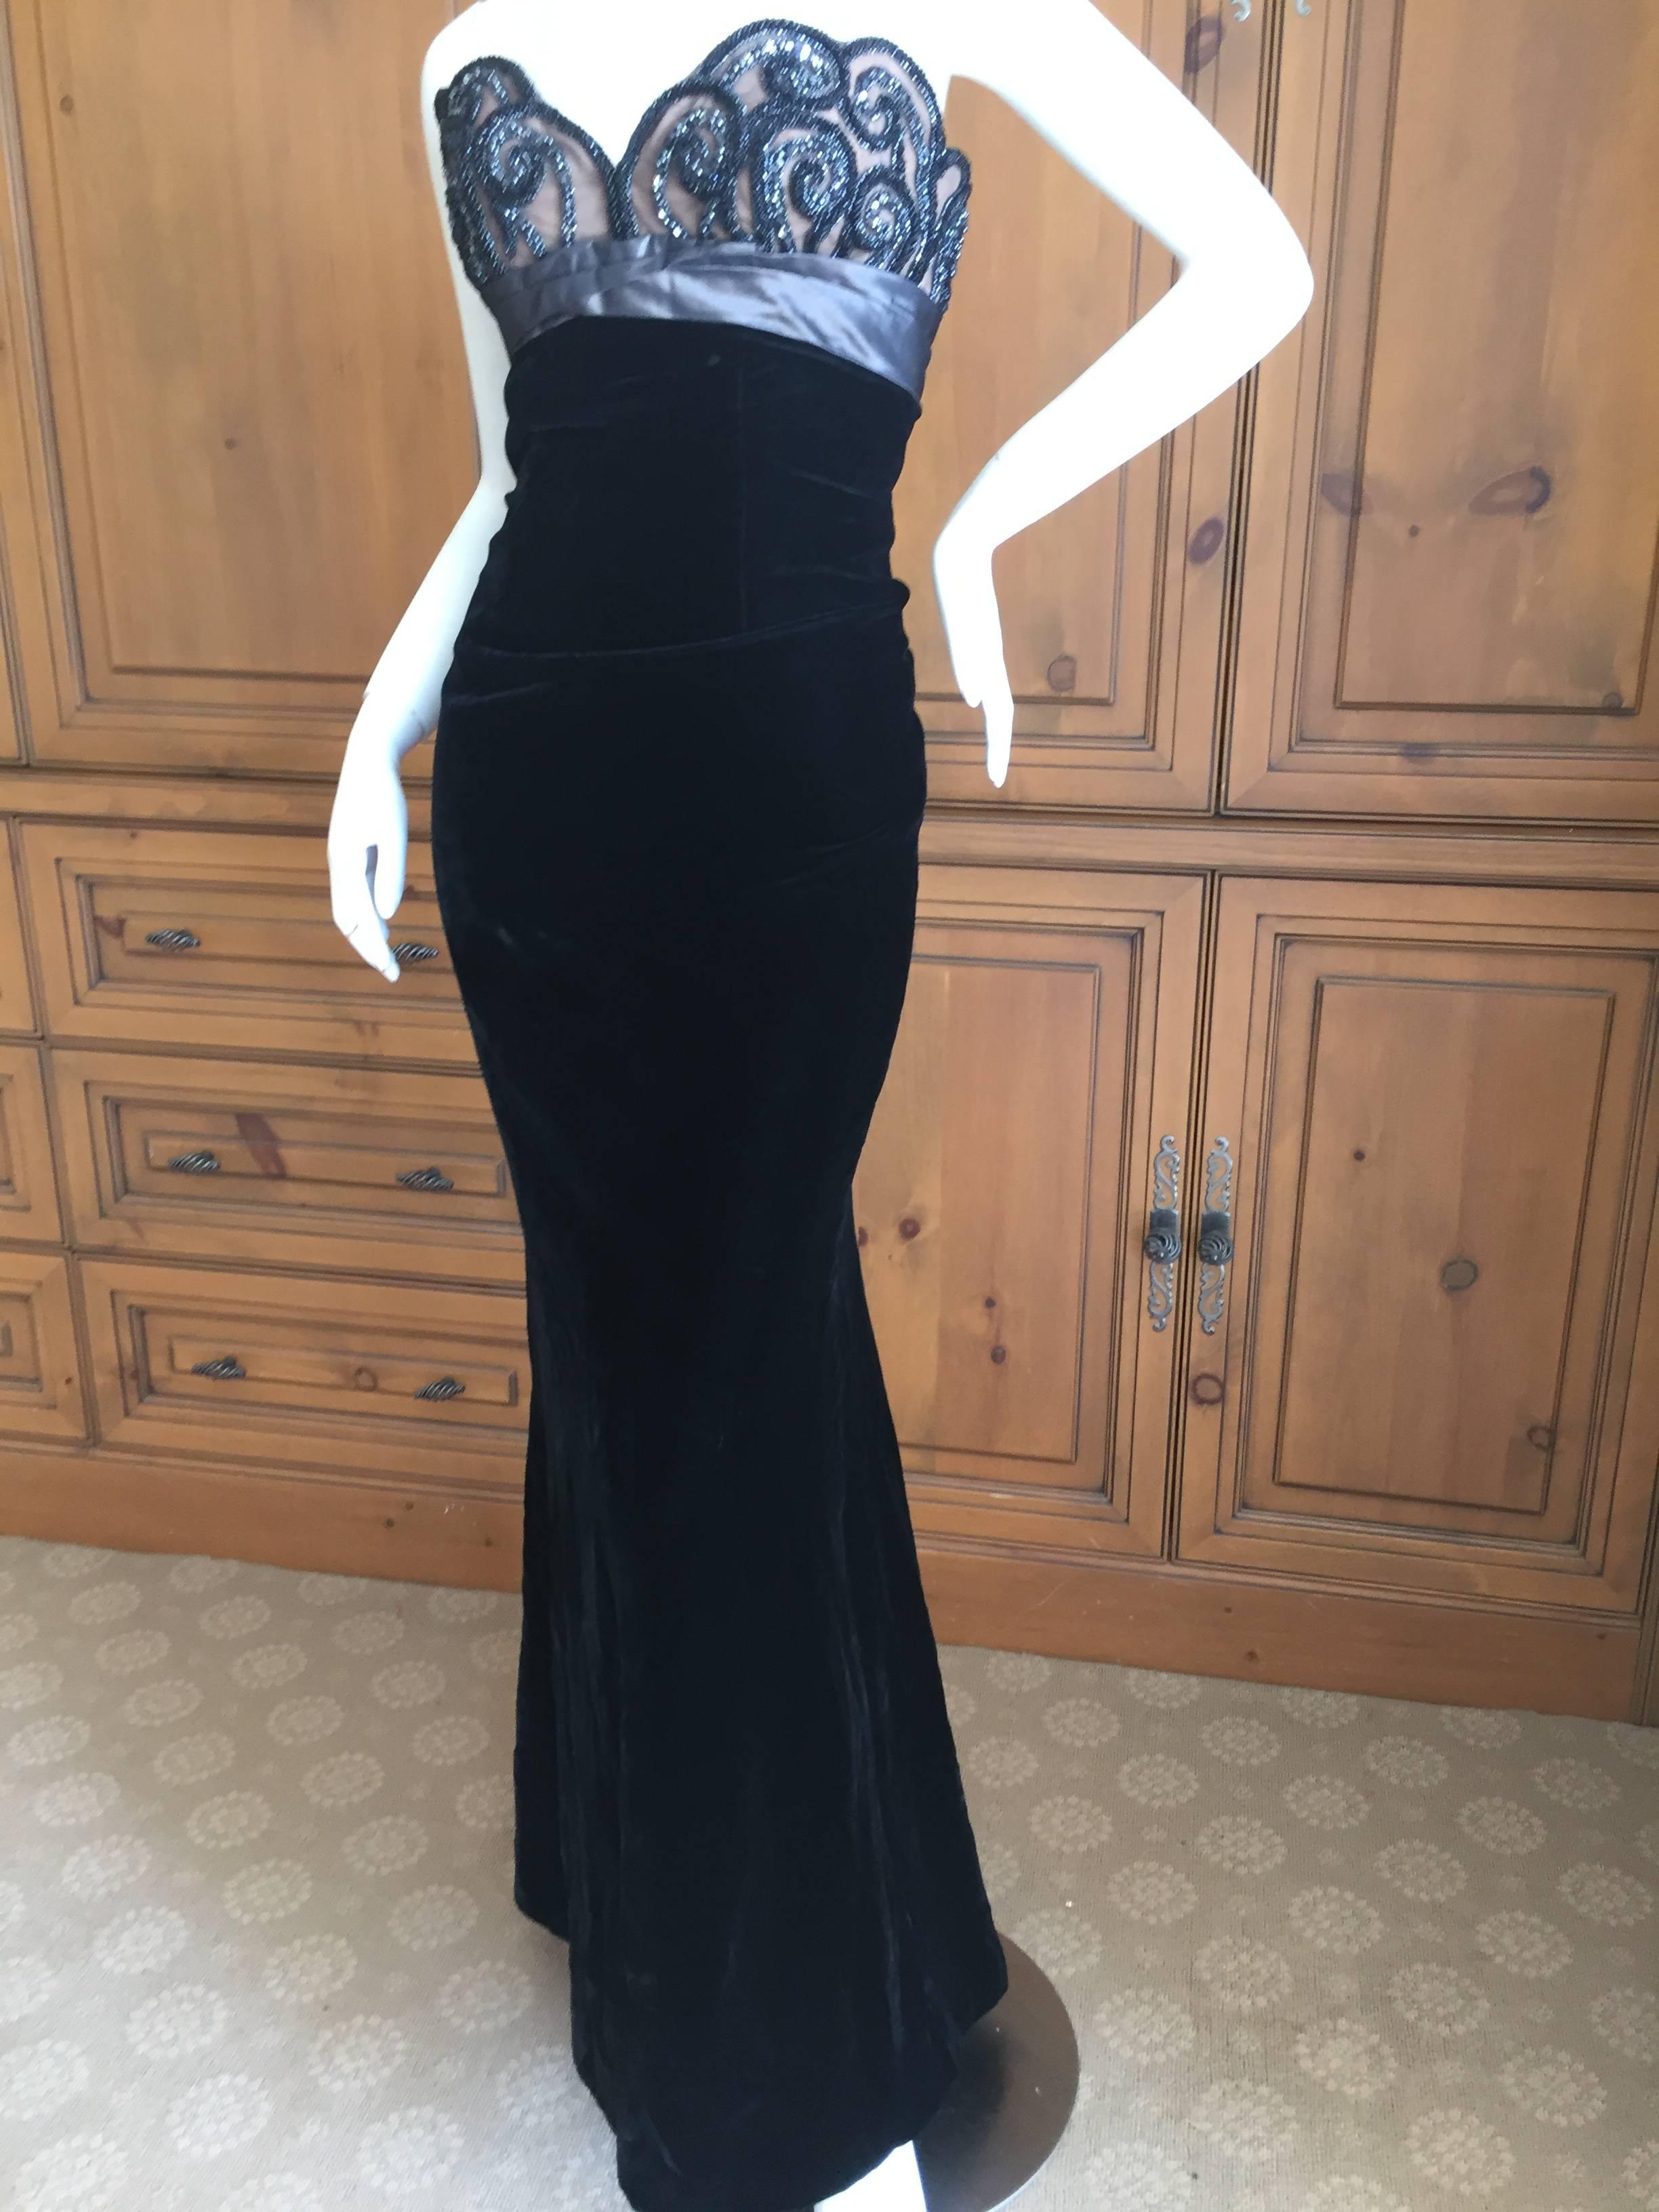 Wonderful black velvet evening dress with beaded bodice from Bob Mackie.
PLease use zoom feature to see all the detail in this beautiful dress.
Size 10 
Bust 28